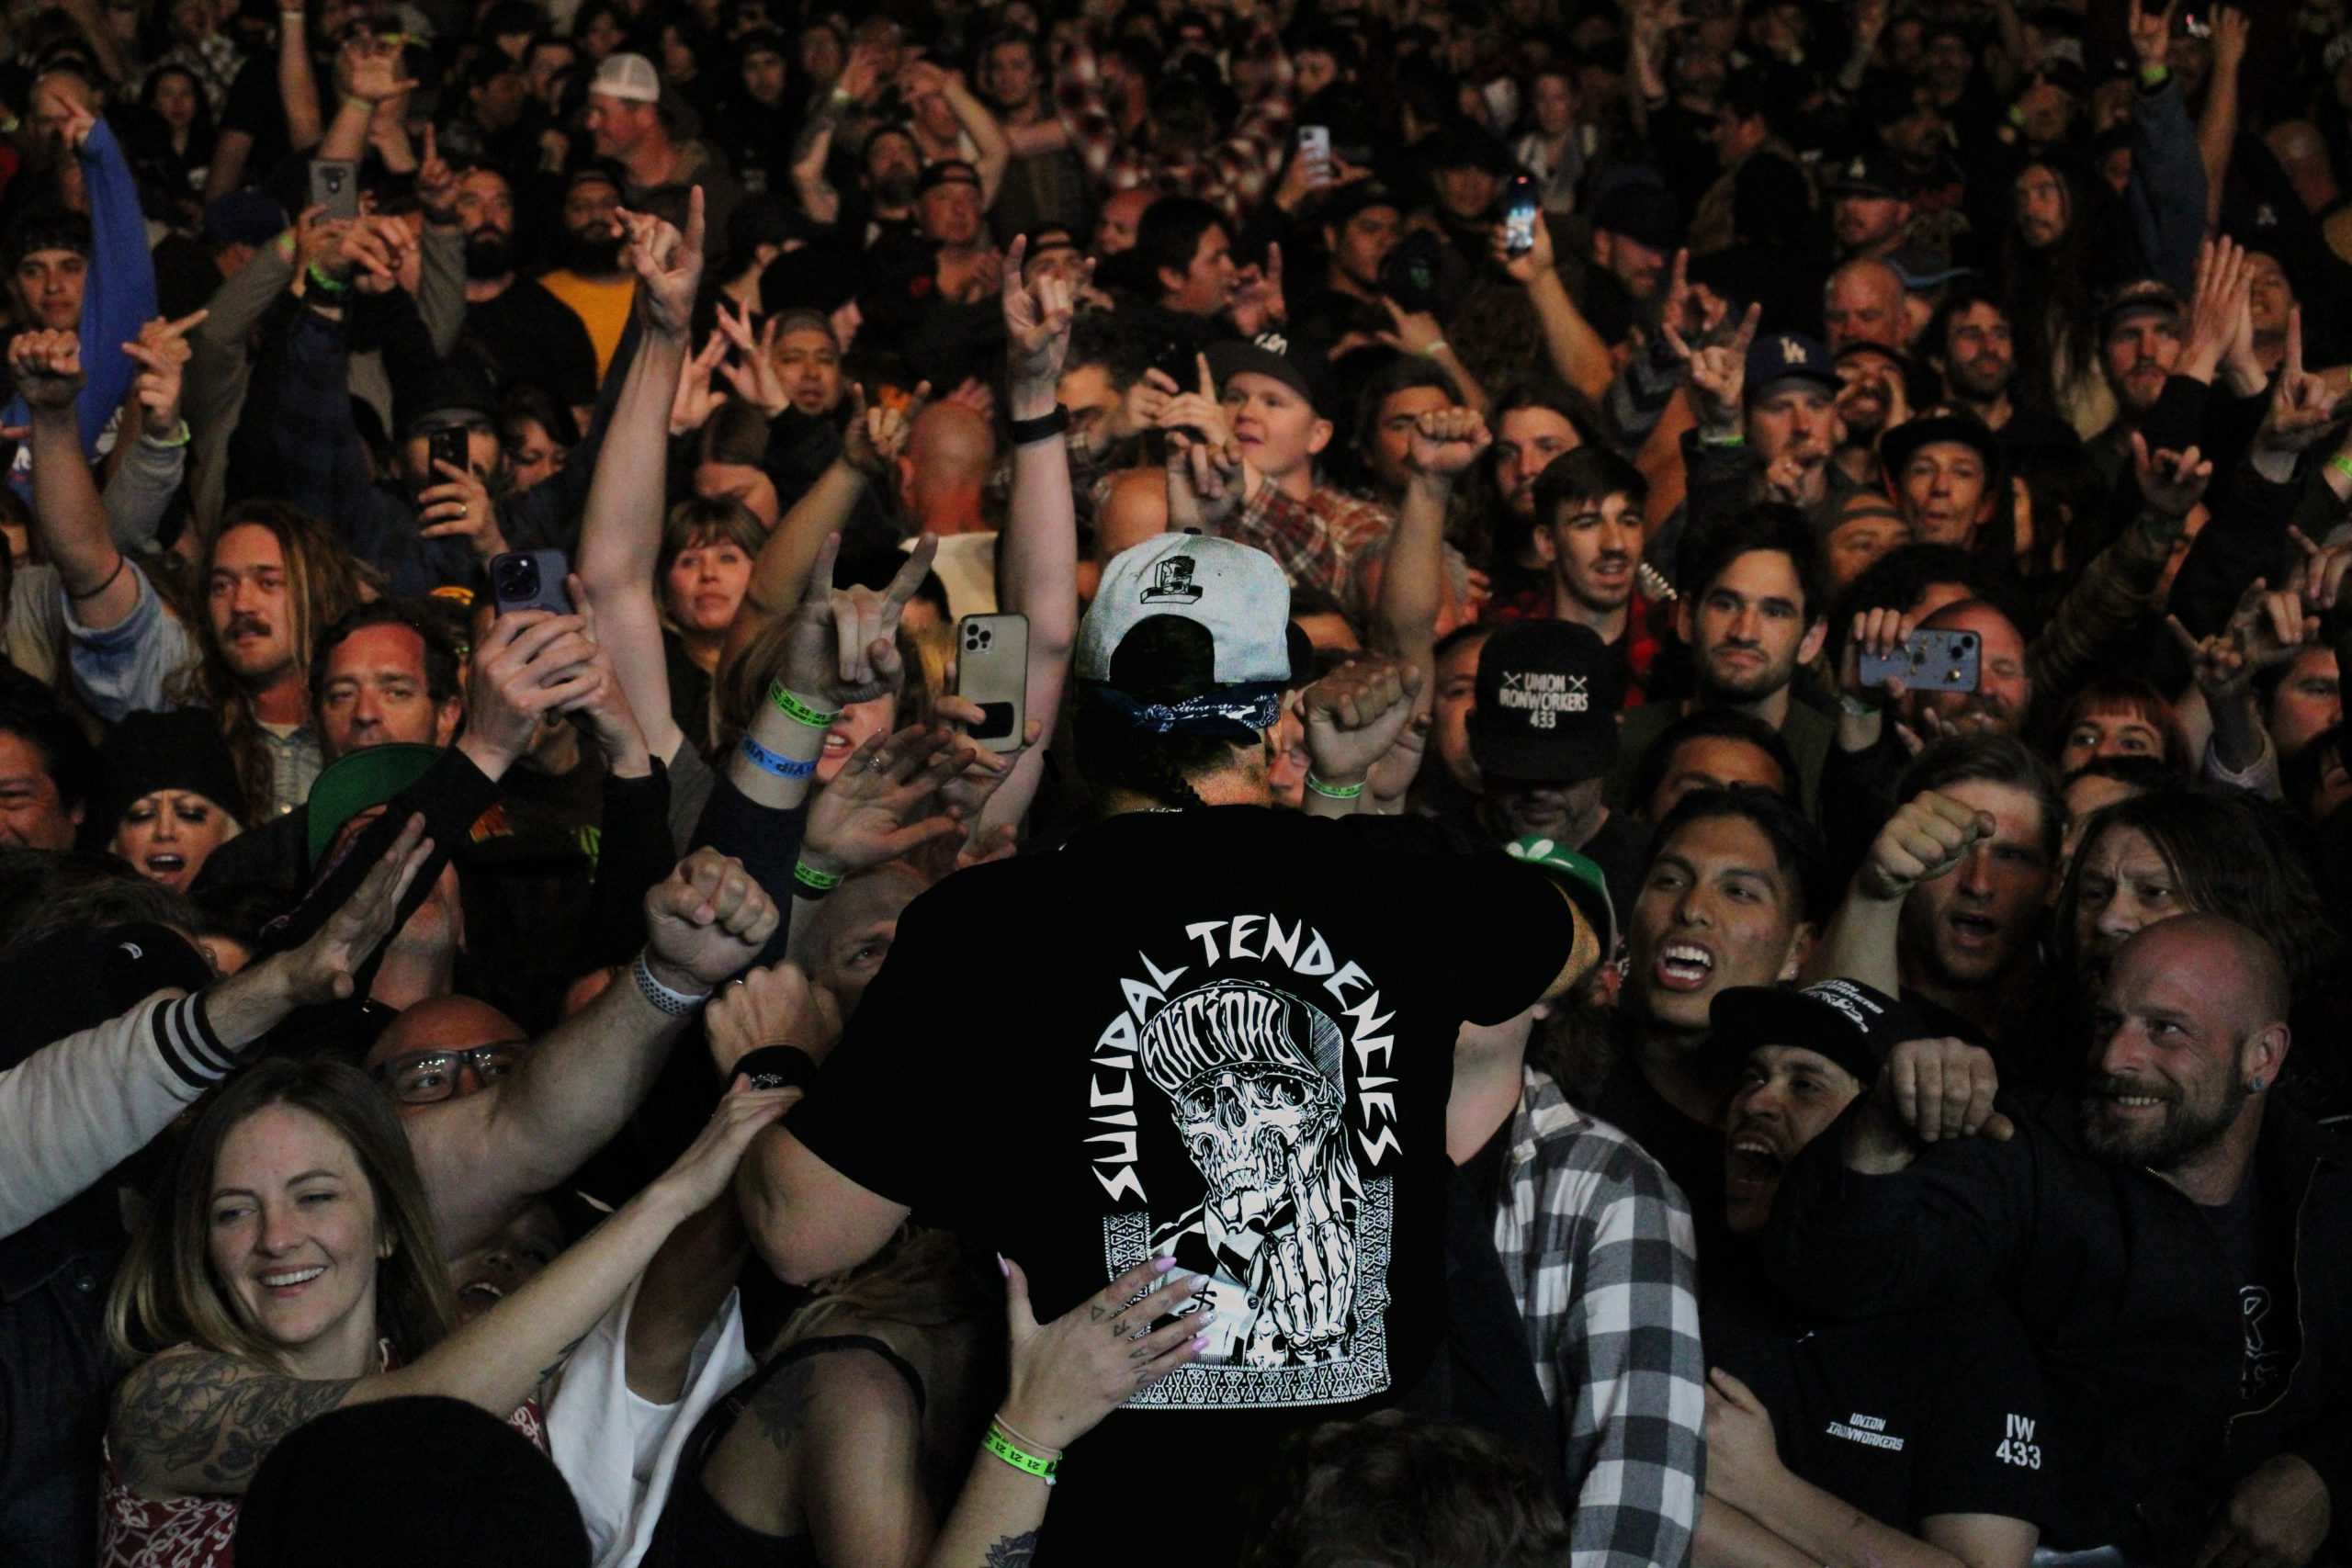 Suicidal Tendencies performing at Punk In The Park Ventura on March 25, 2023.